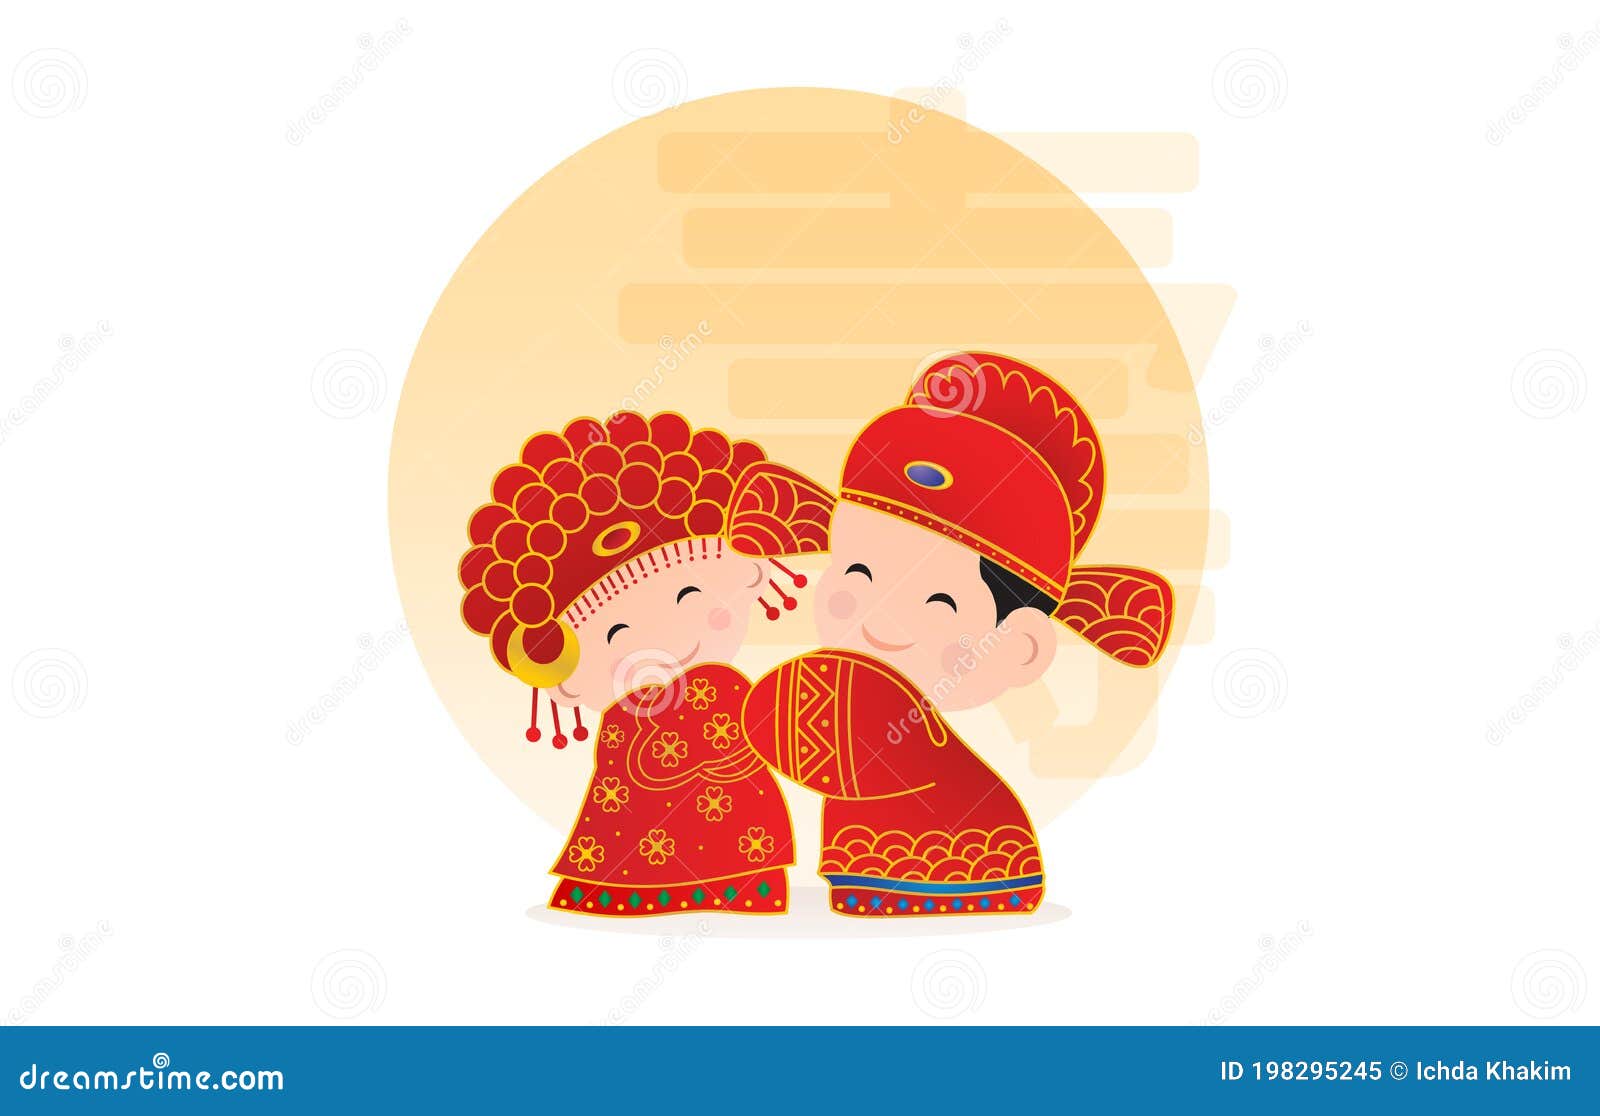 Chinese Wedding Couple, Chinese Wedding Cartoon, Traditional Chinese Wedding,  Chinese Bride and Groom Cartoon Wedding Traditional Stock Vector -  Illustration of married, foil: 198295245